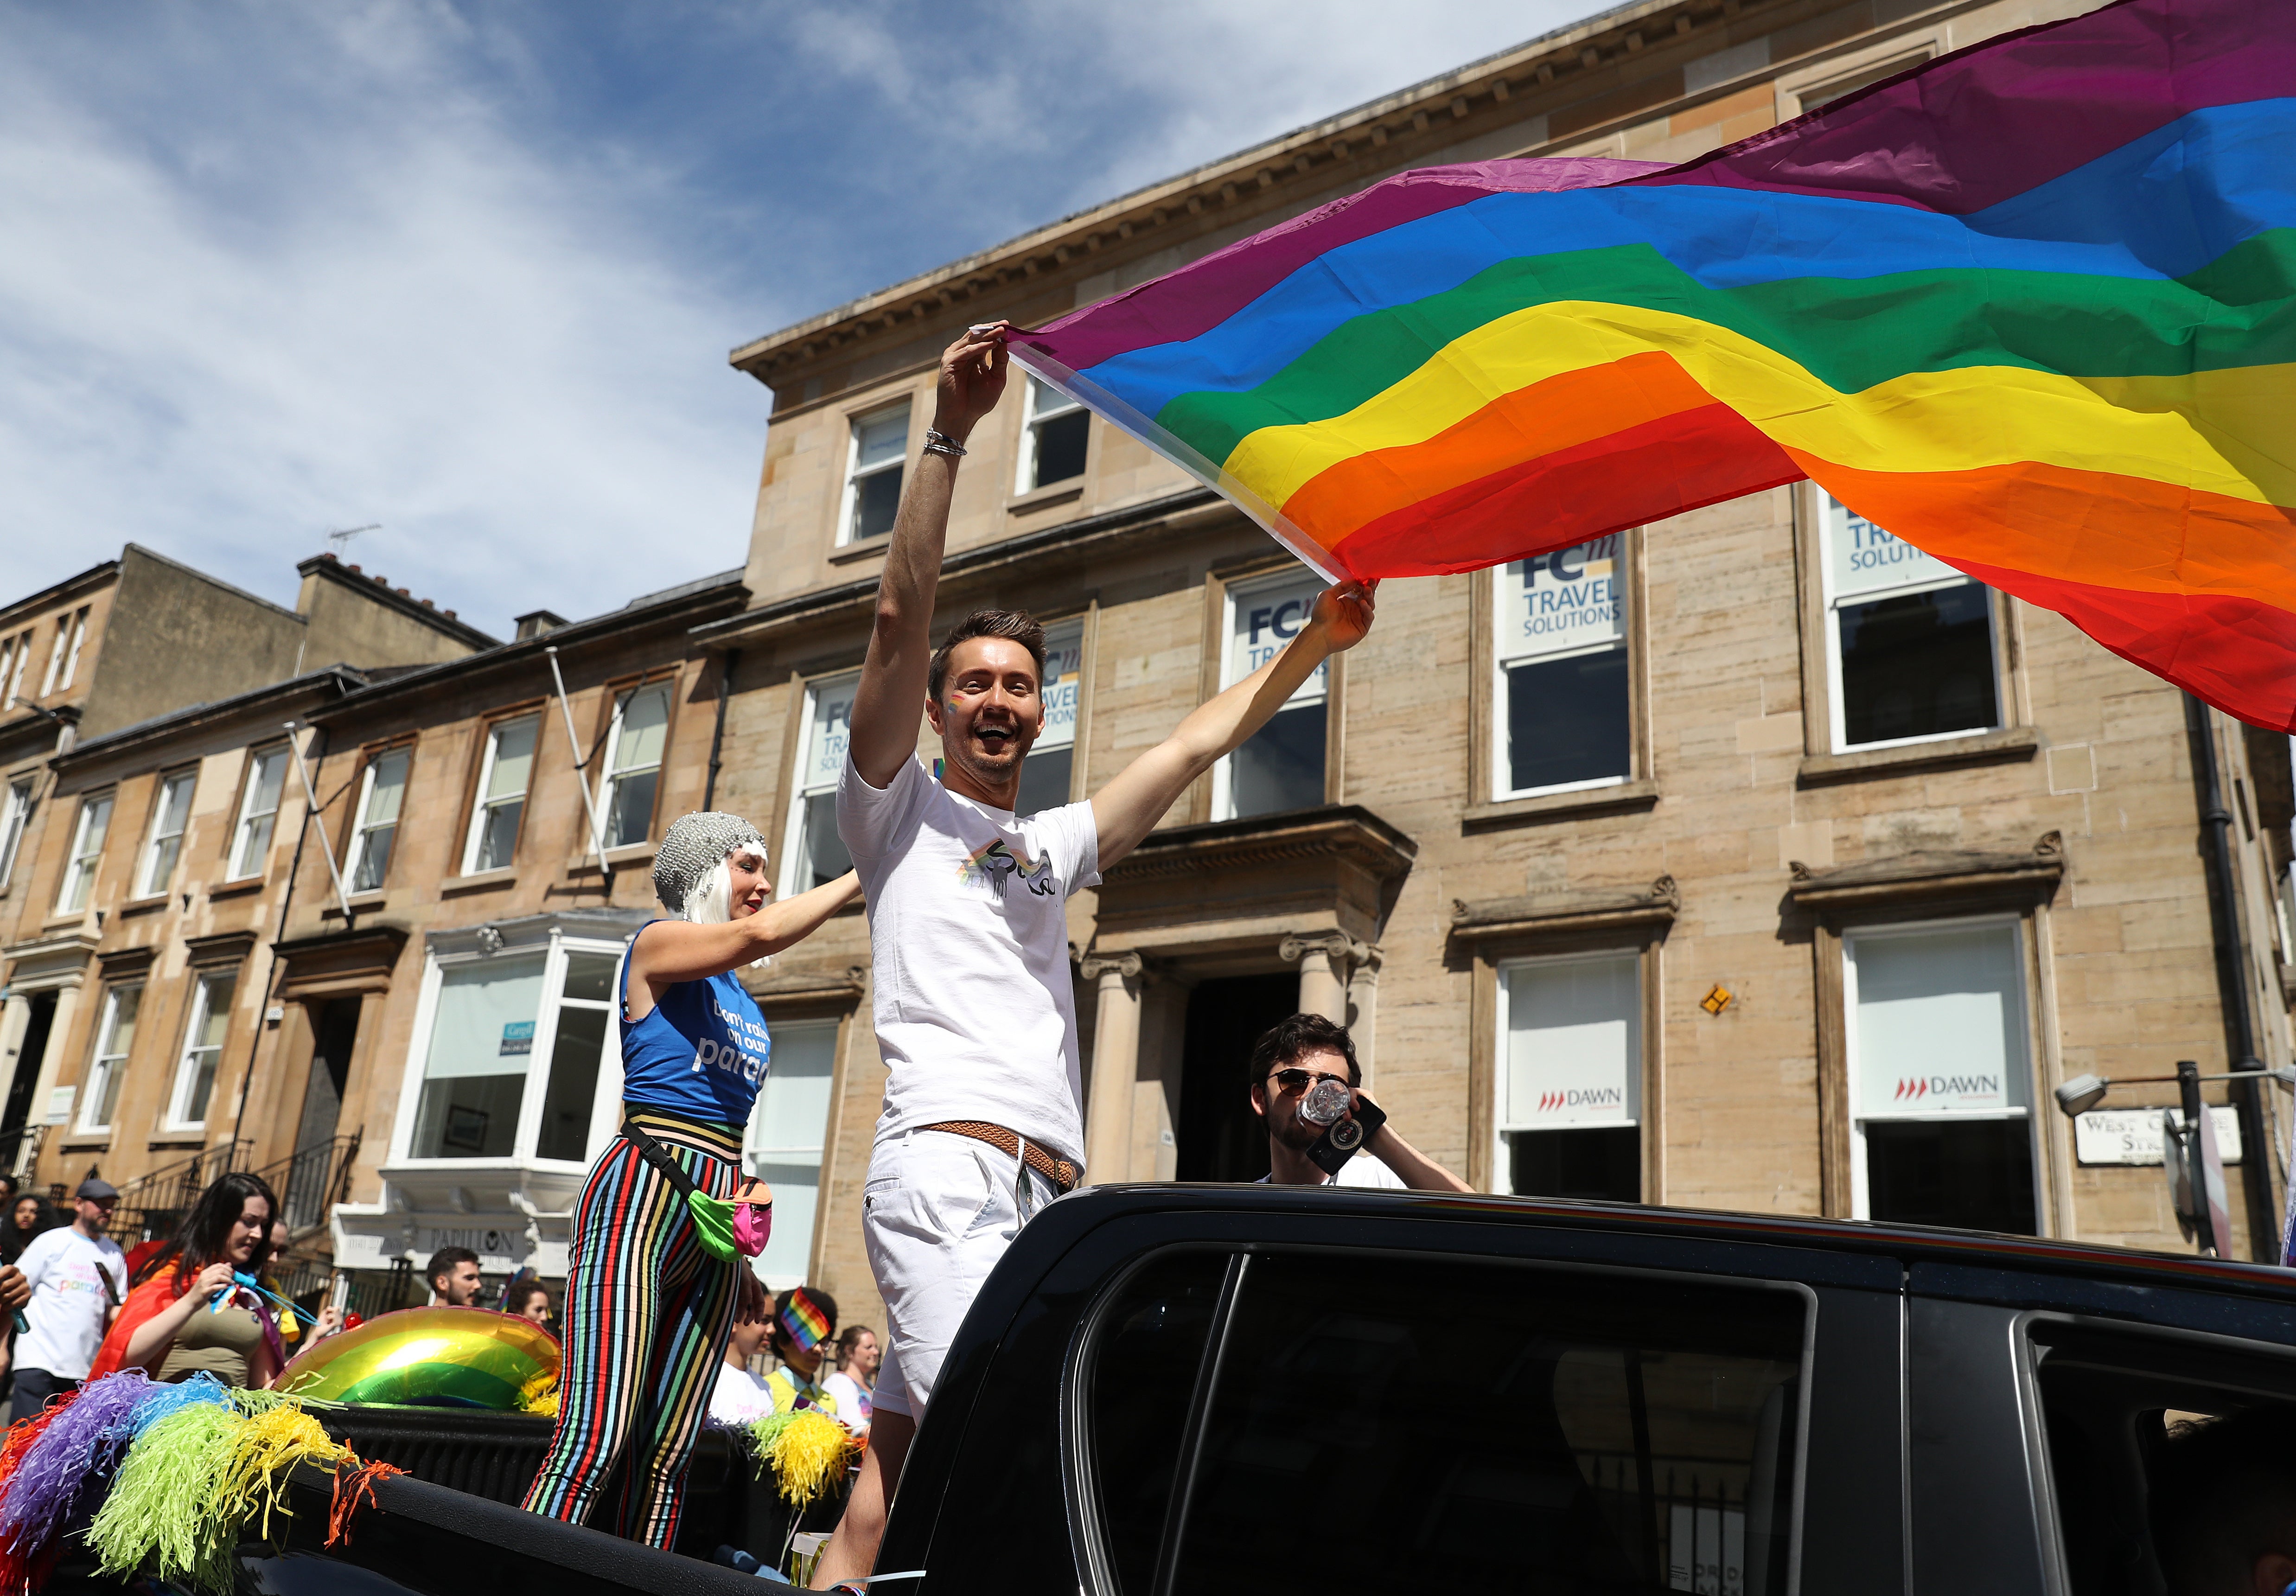 More than 100 groups have pulled out of the Government’s LGBT conference (Andrew Milligan/PA)